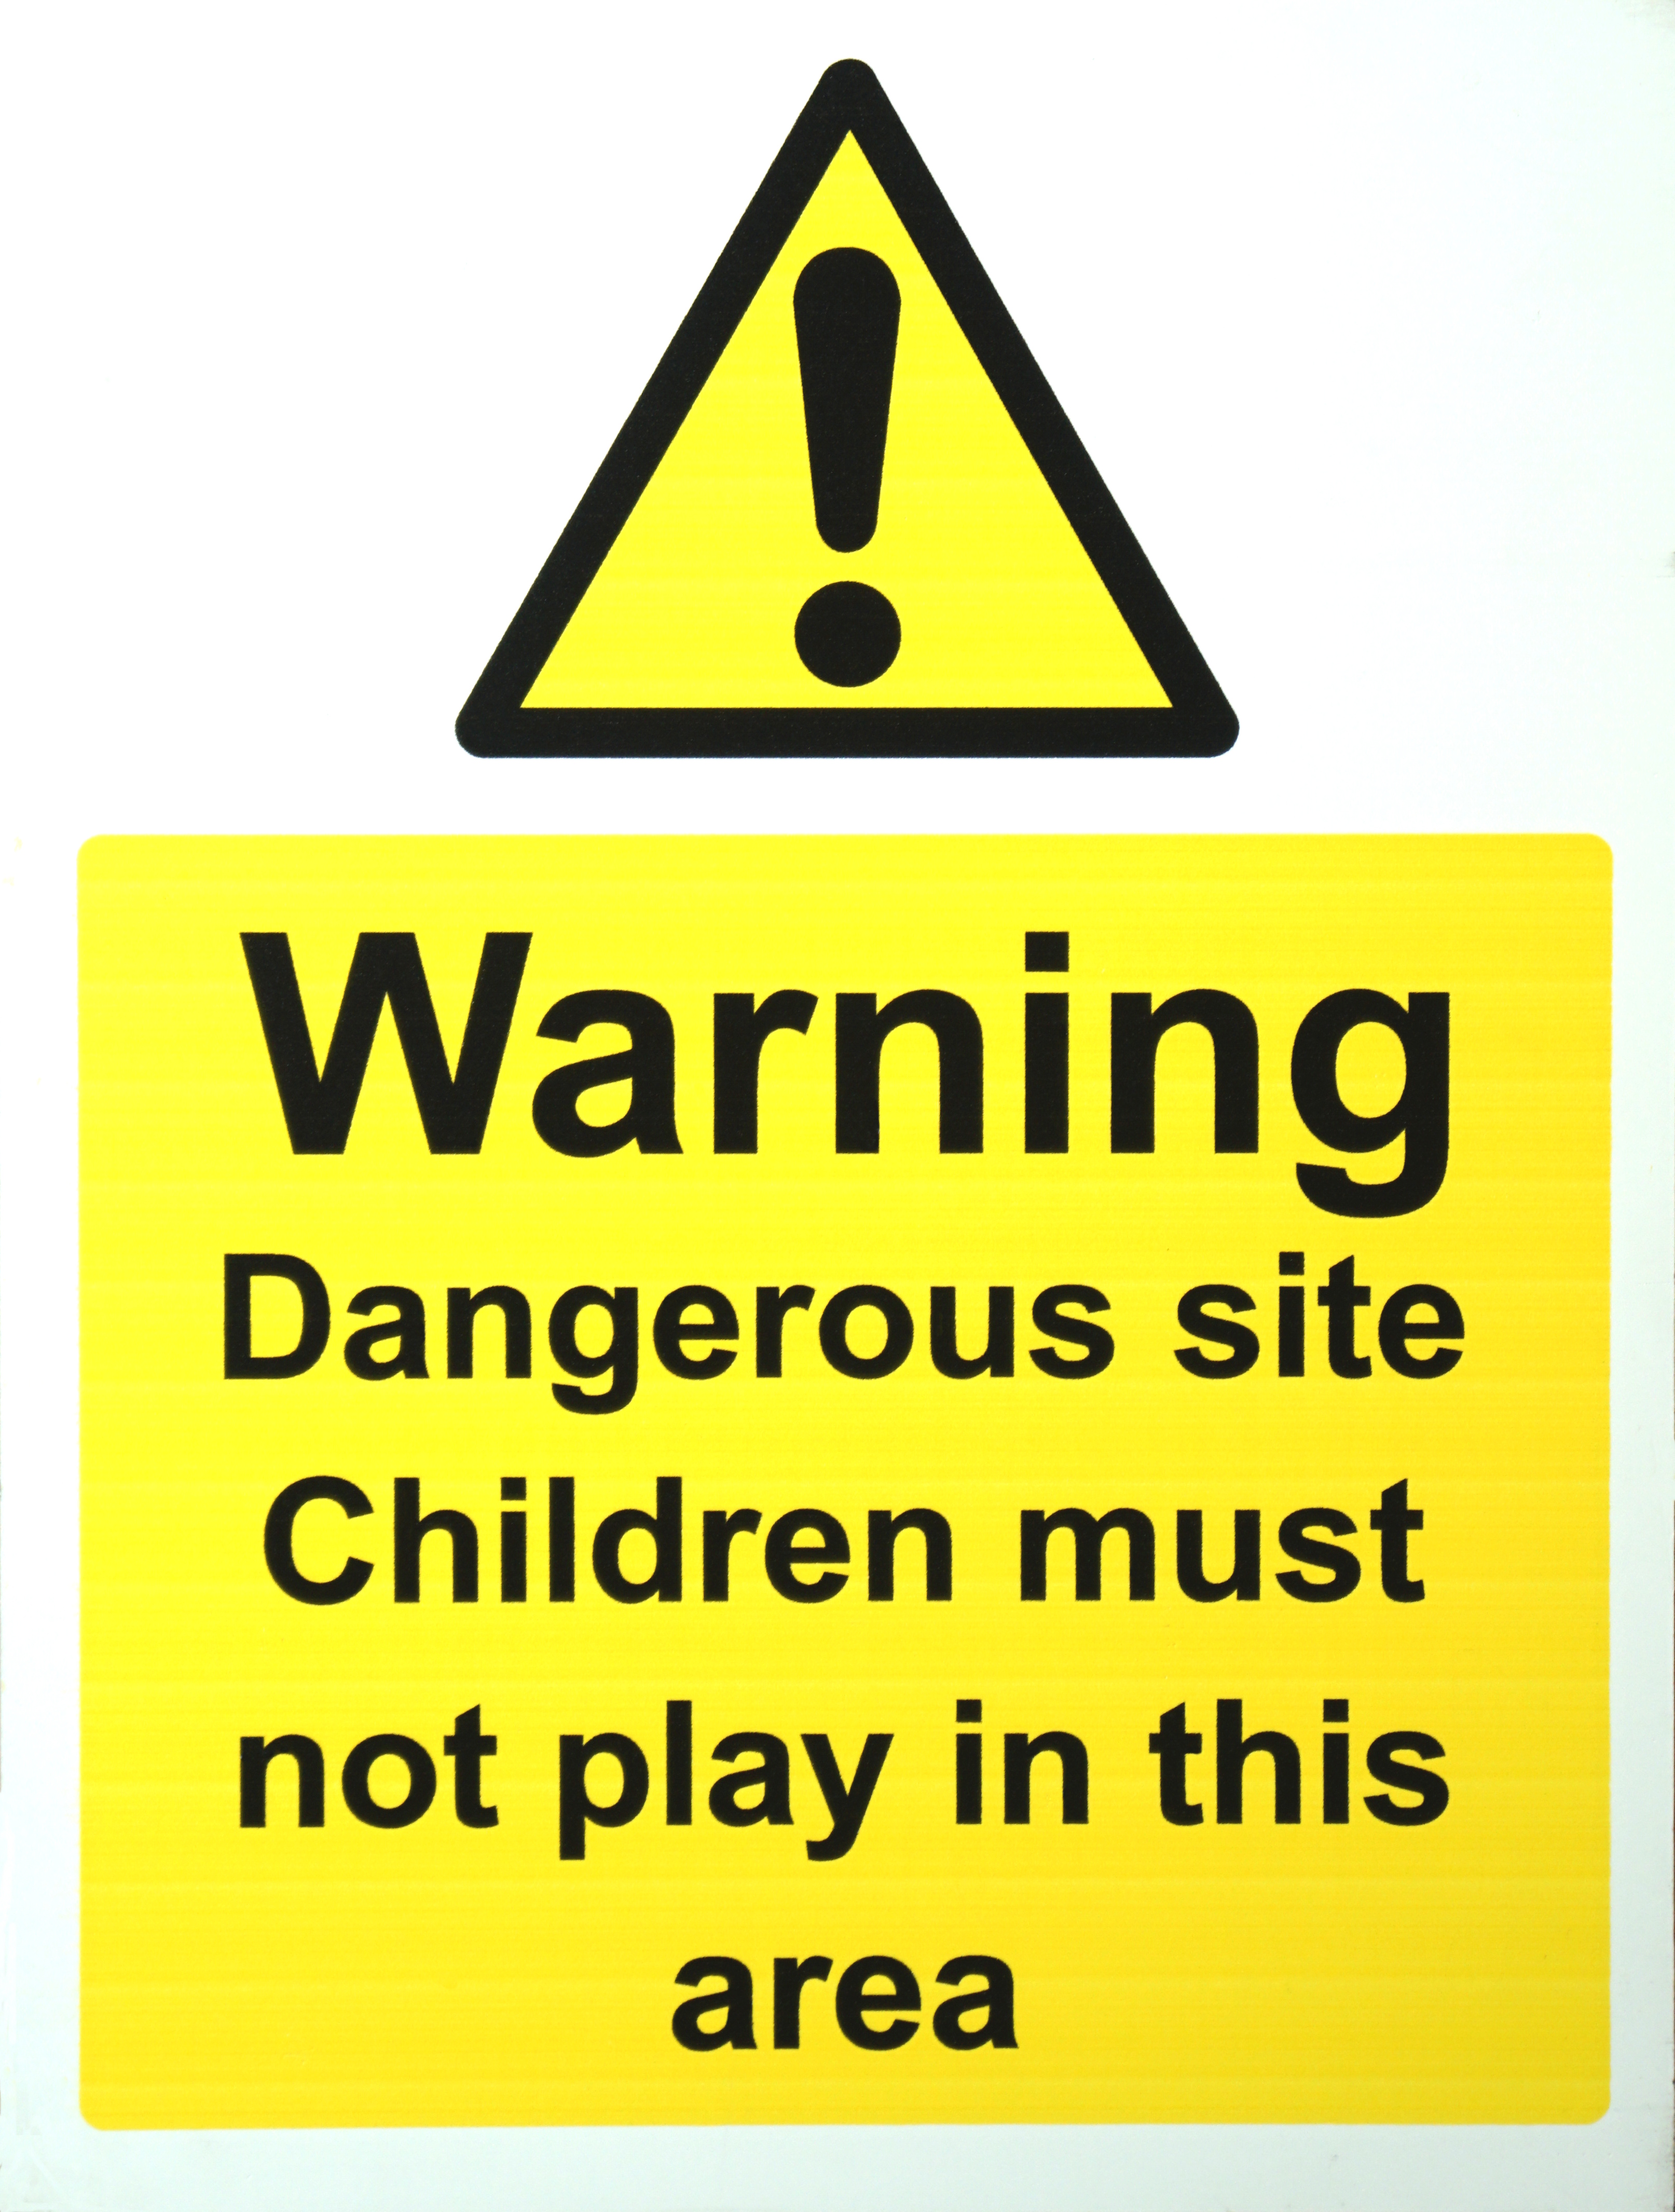 400x300 Warning dangerous site children must not play in this area sign 1mm rigid plastic